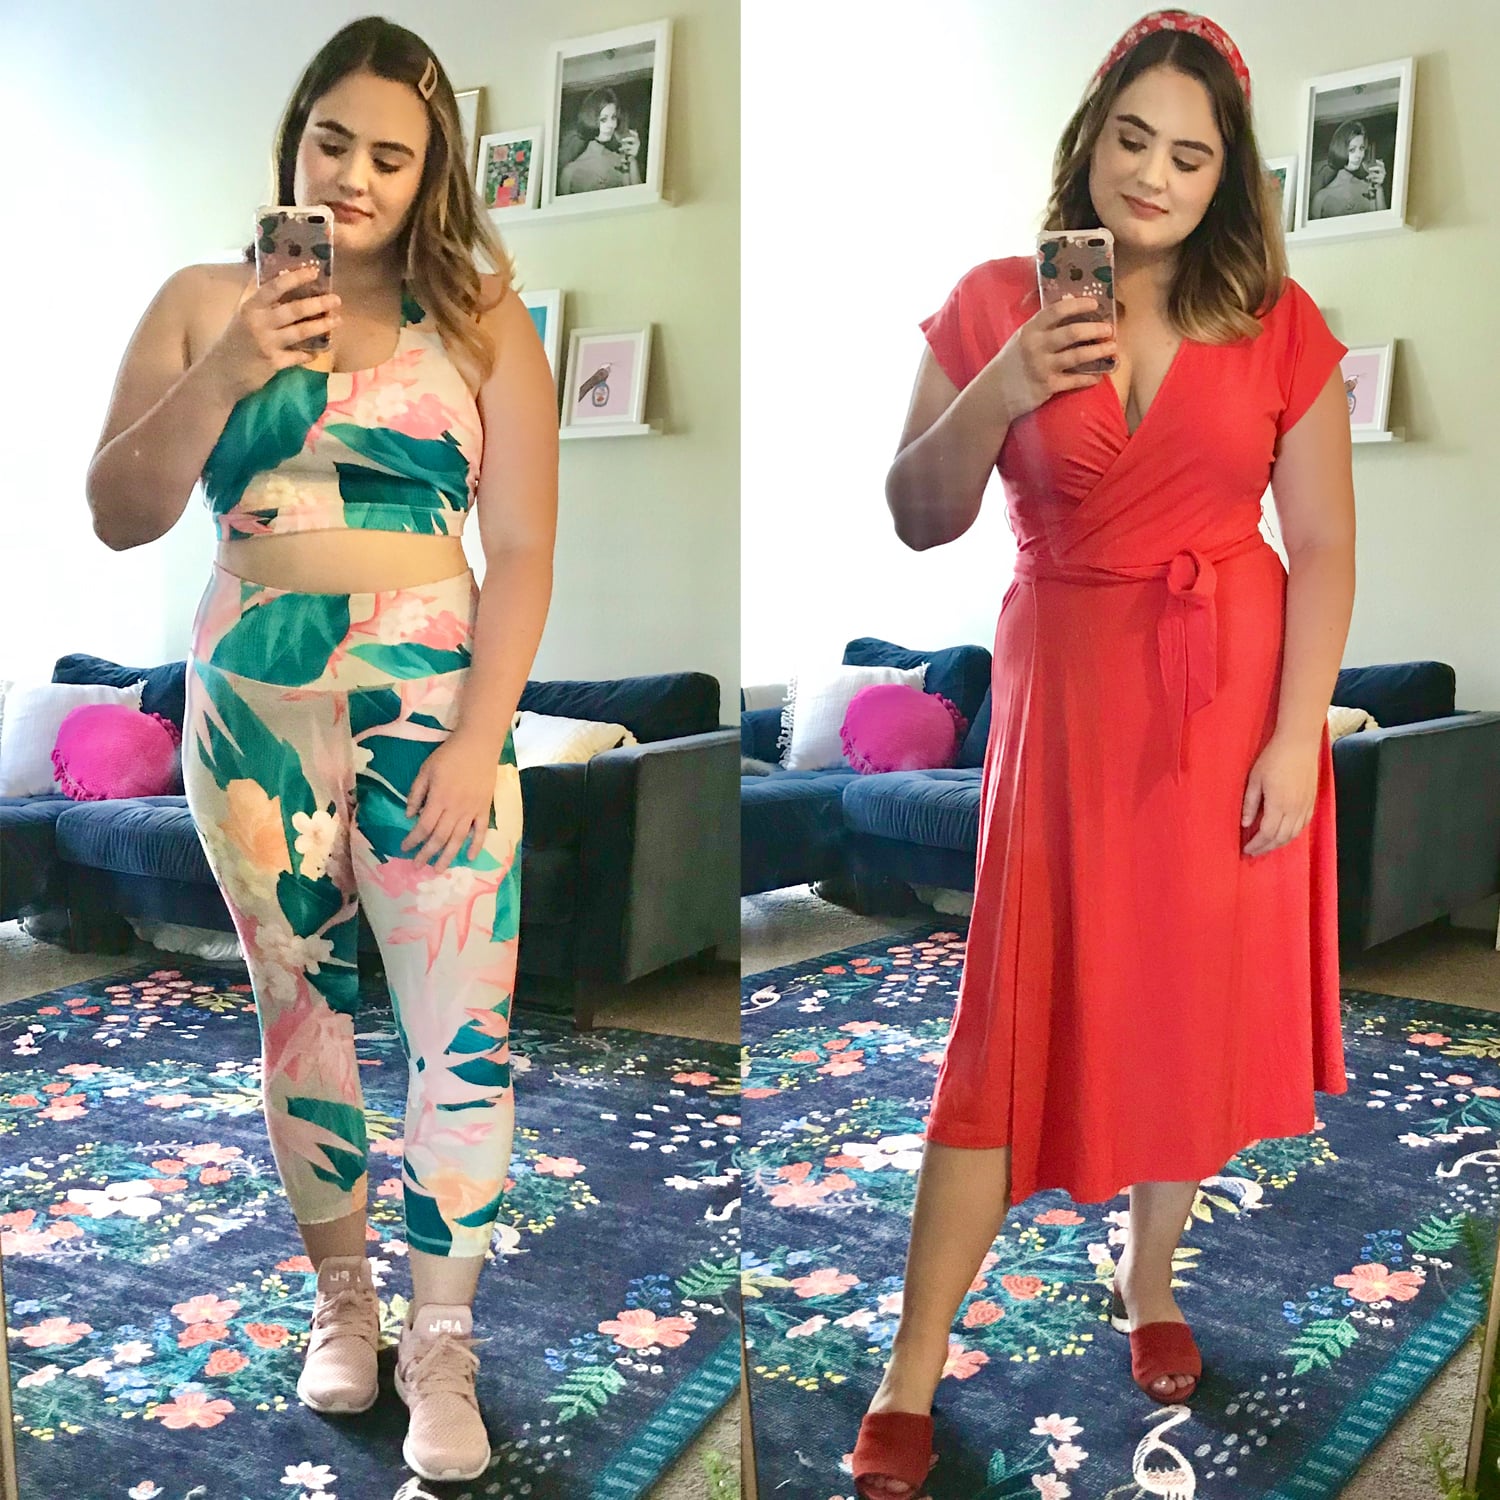 old navy women's summer clothes